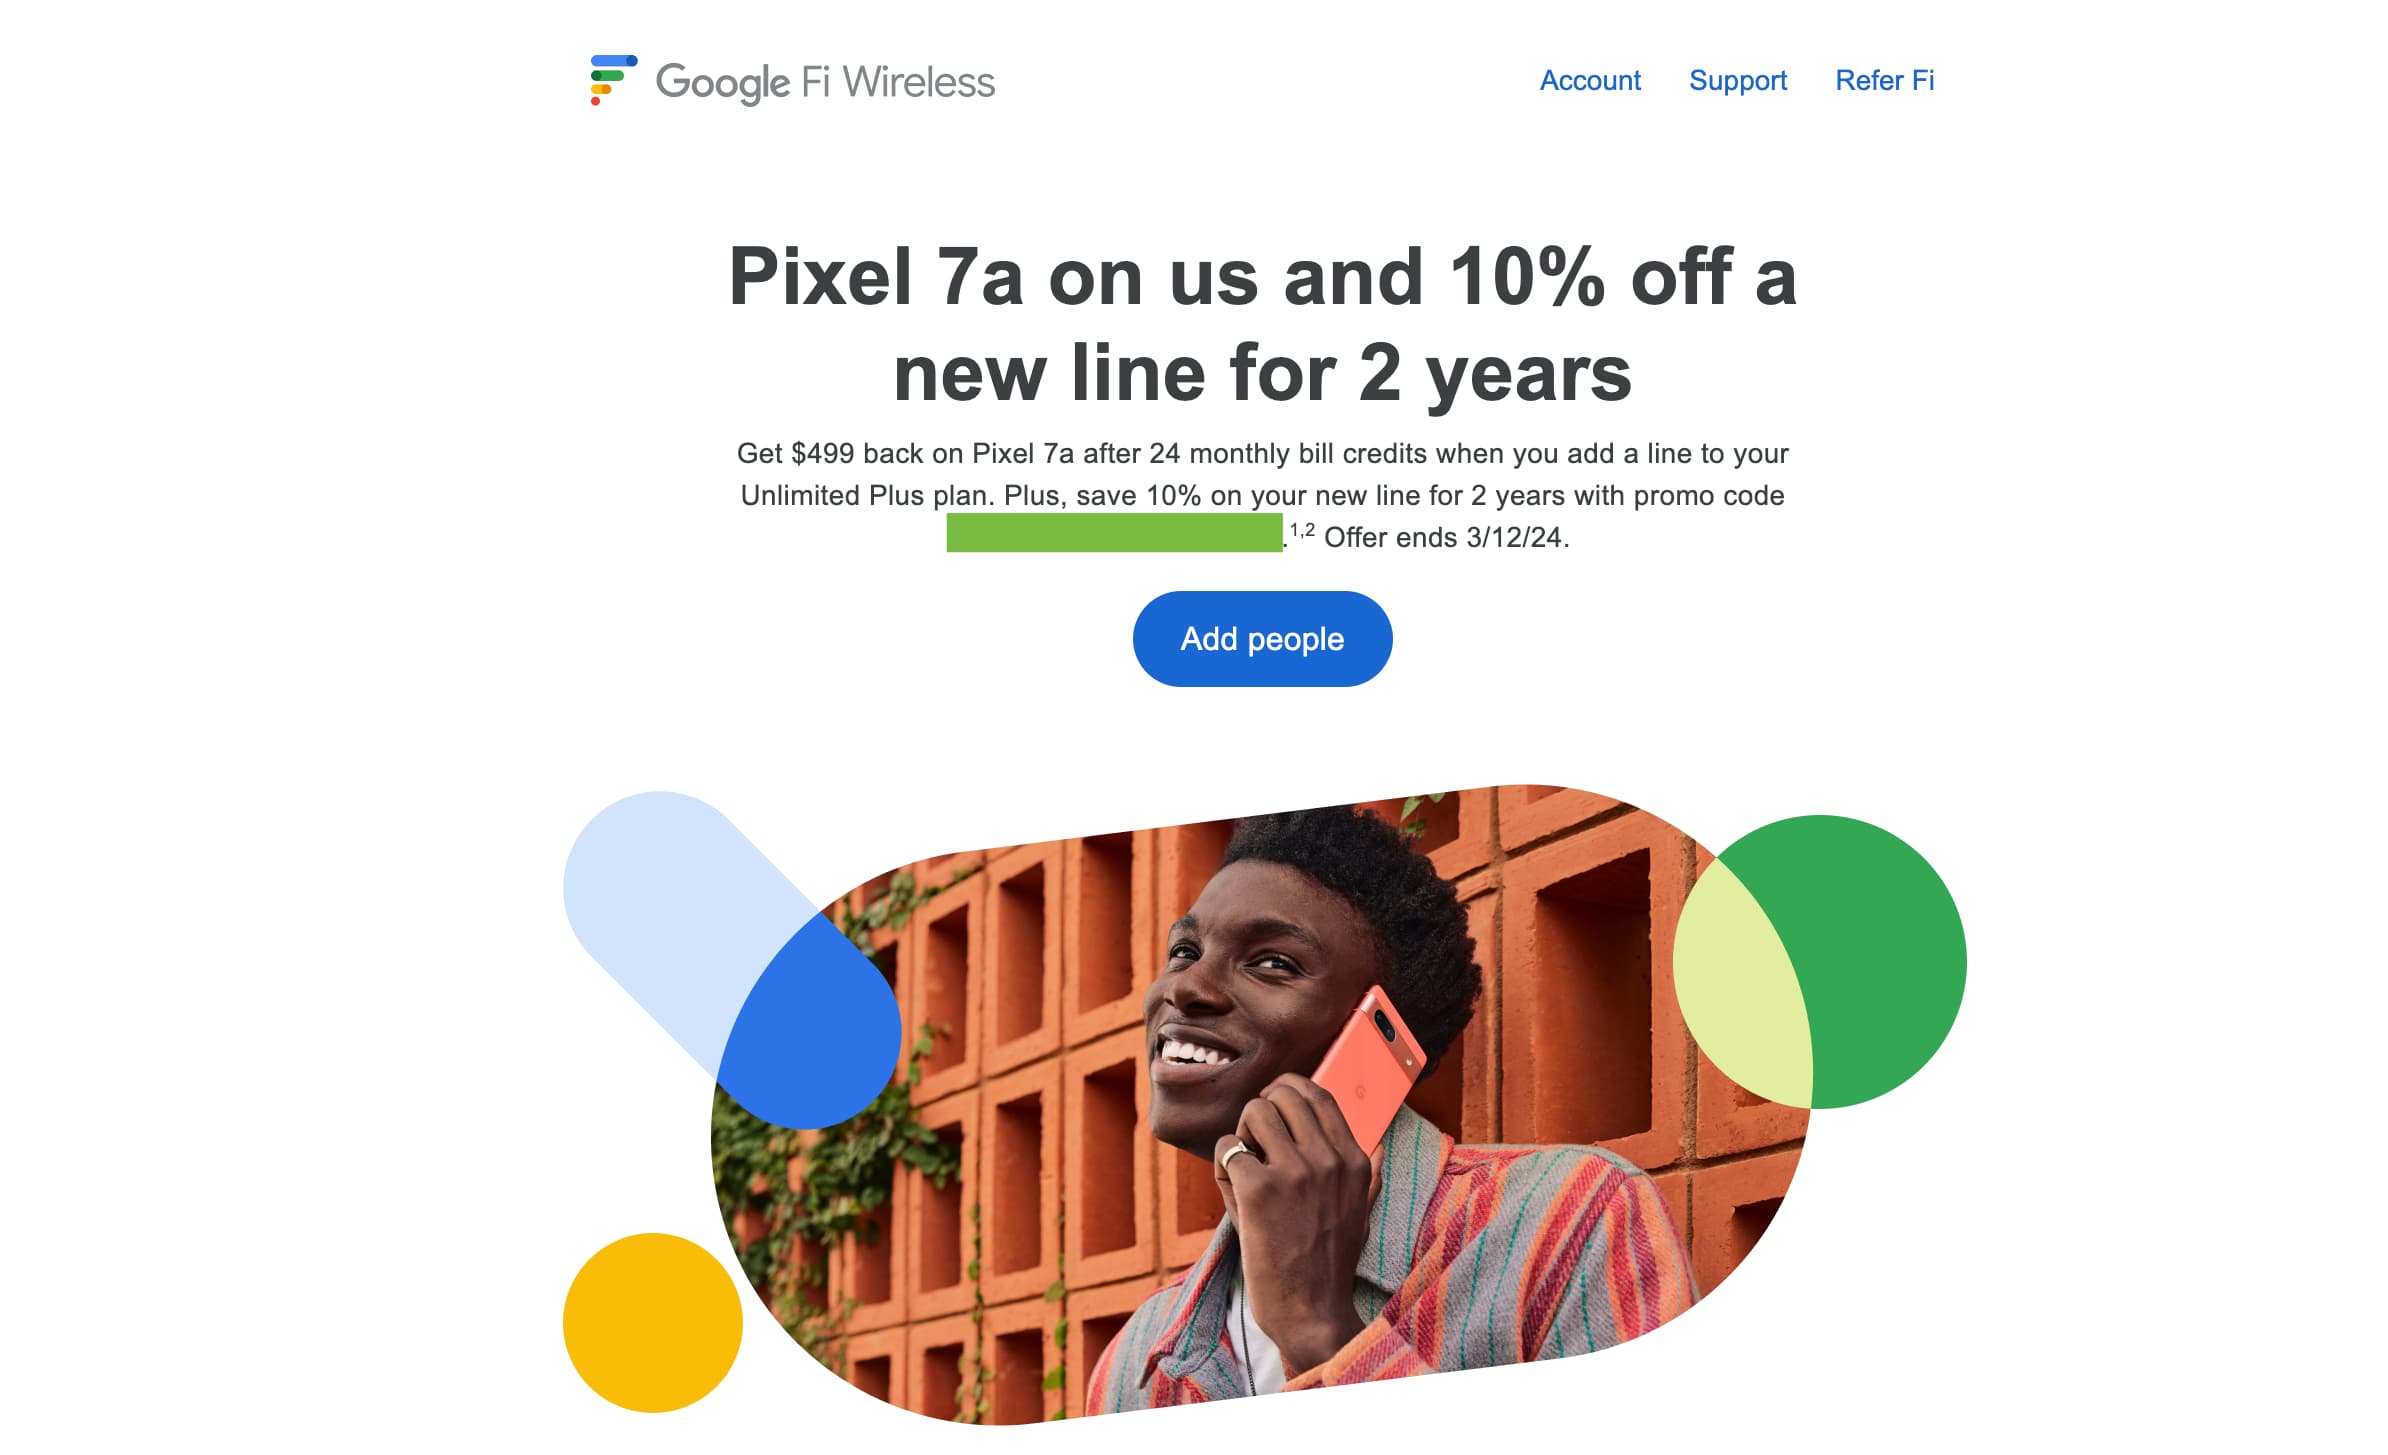 Google Fi promo code takes 10 off new line for 2 years